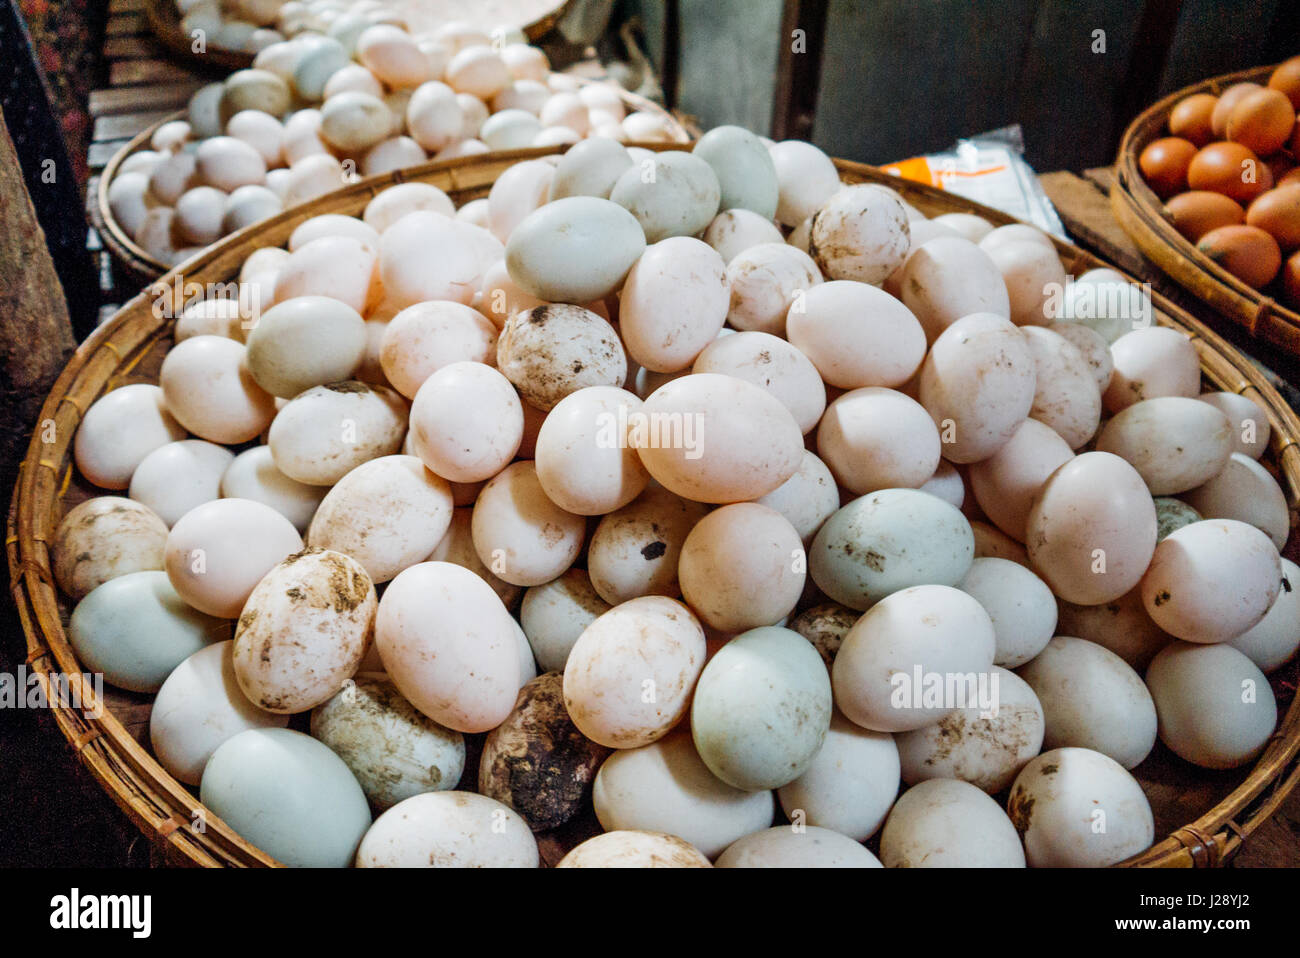 Stack of white eggs on a rattan tray at a market in Bagan, Myanmar. Stock Photo